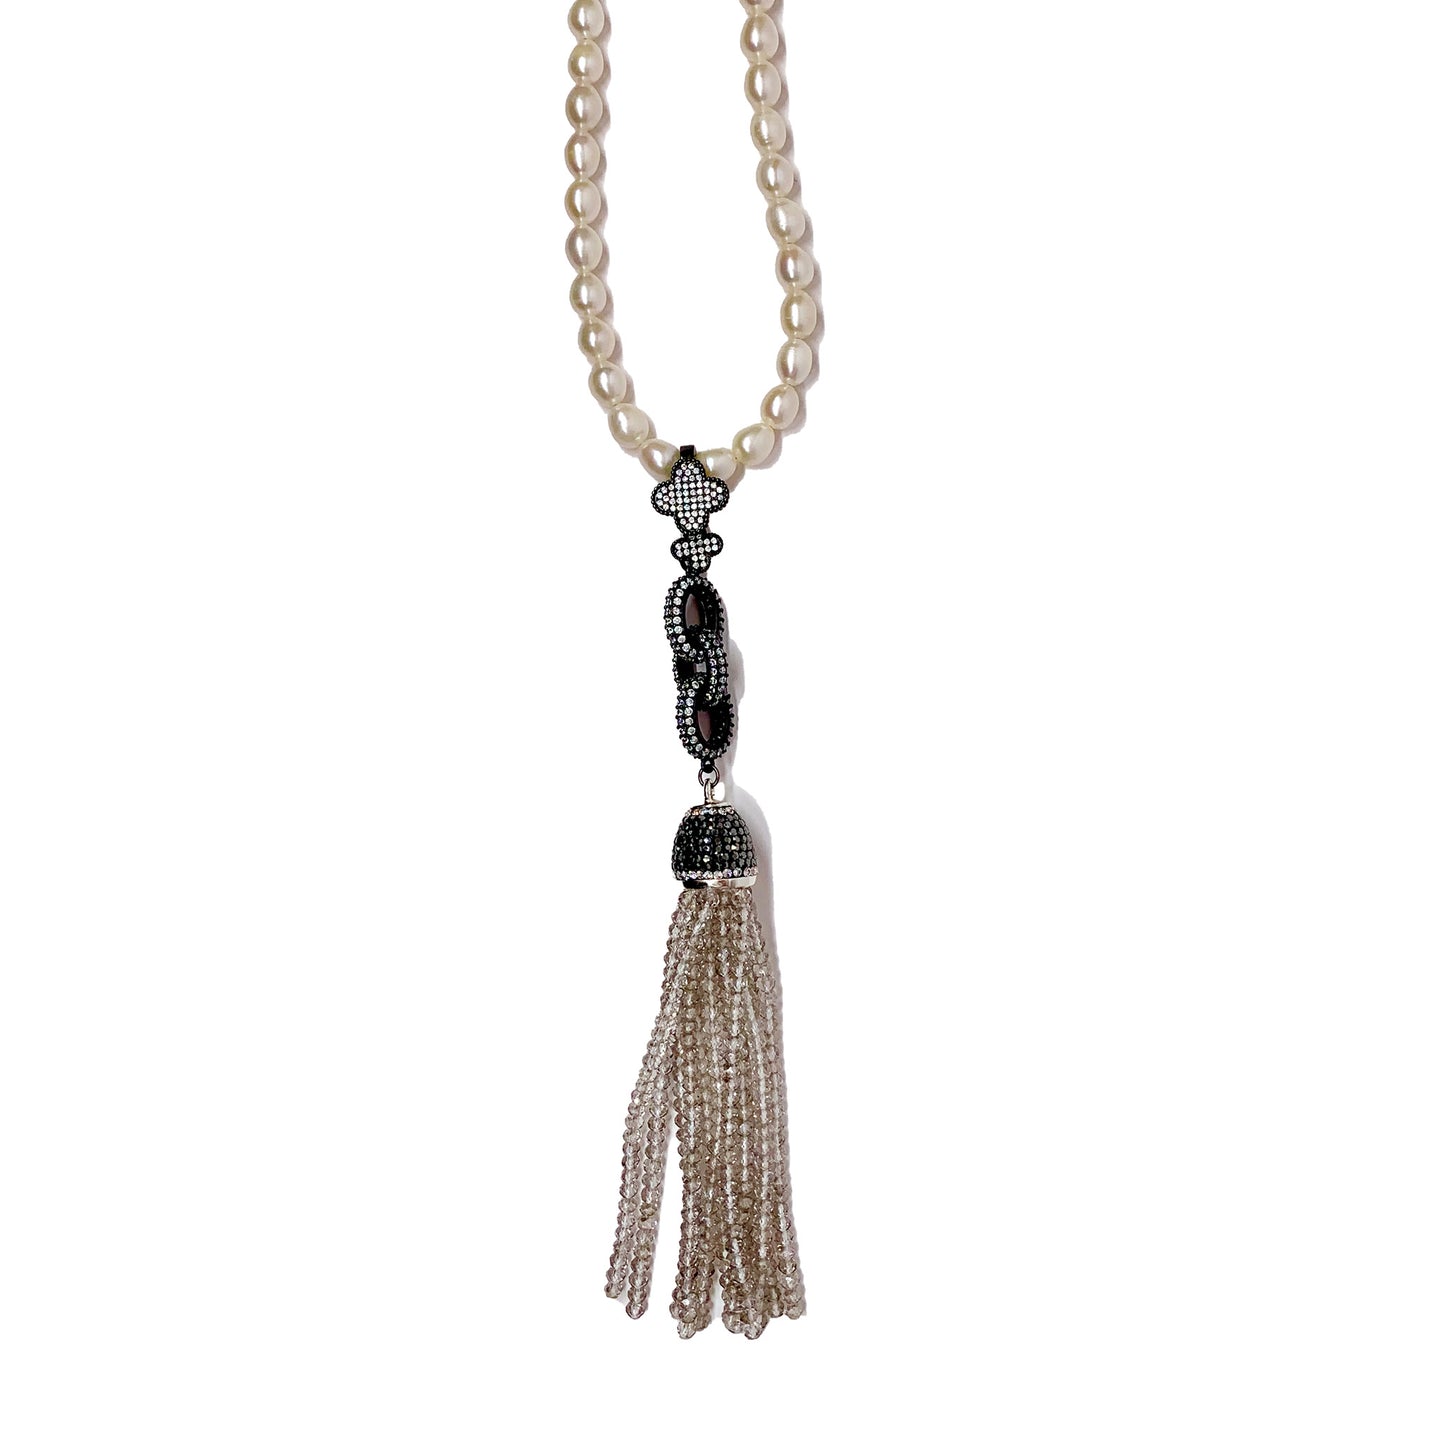 Cultured Pearls Necklace with Crystal Tassel Pendant